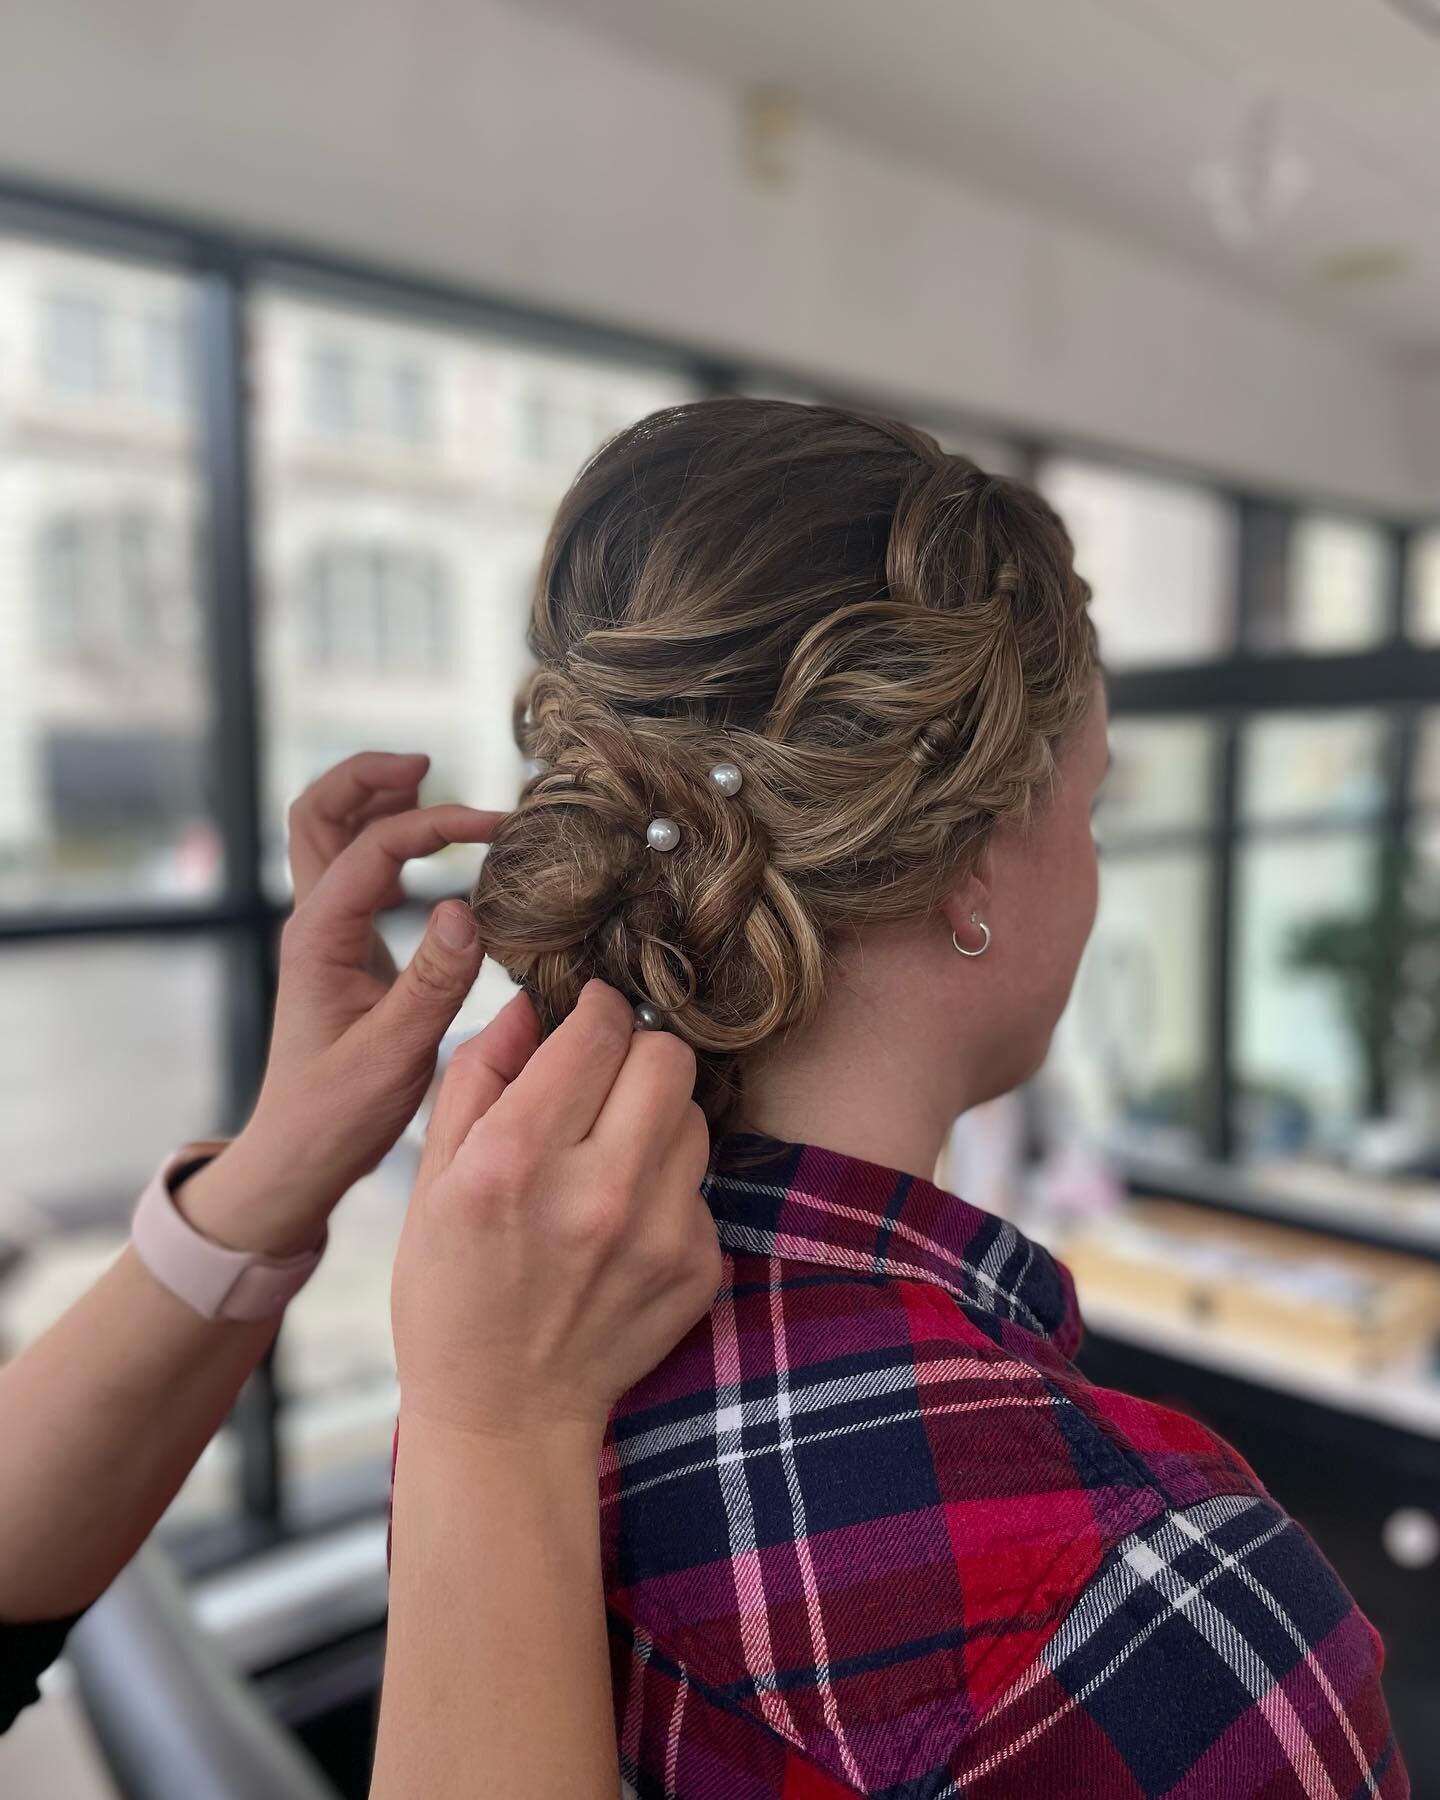 💍Wedding Season is upon us! ✨We are happy to help you with your Wedding Hair &amp; Make-up! 💋This beautiful Bride&rsquo;s Hair was styled by Lindsay, our in-house Wedding Hair &amp; Make-up Guru! 🤩✨
Contact us if you have any questions for your up